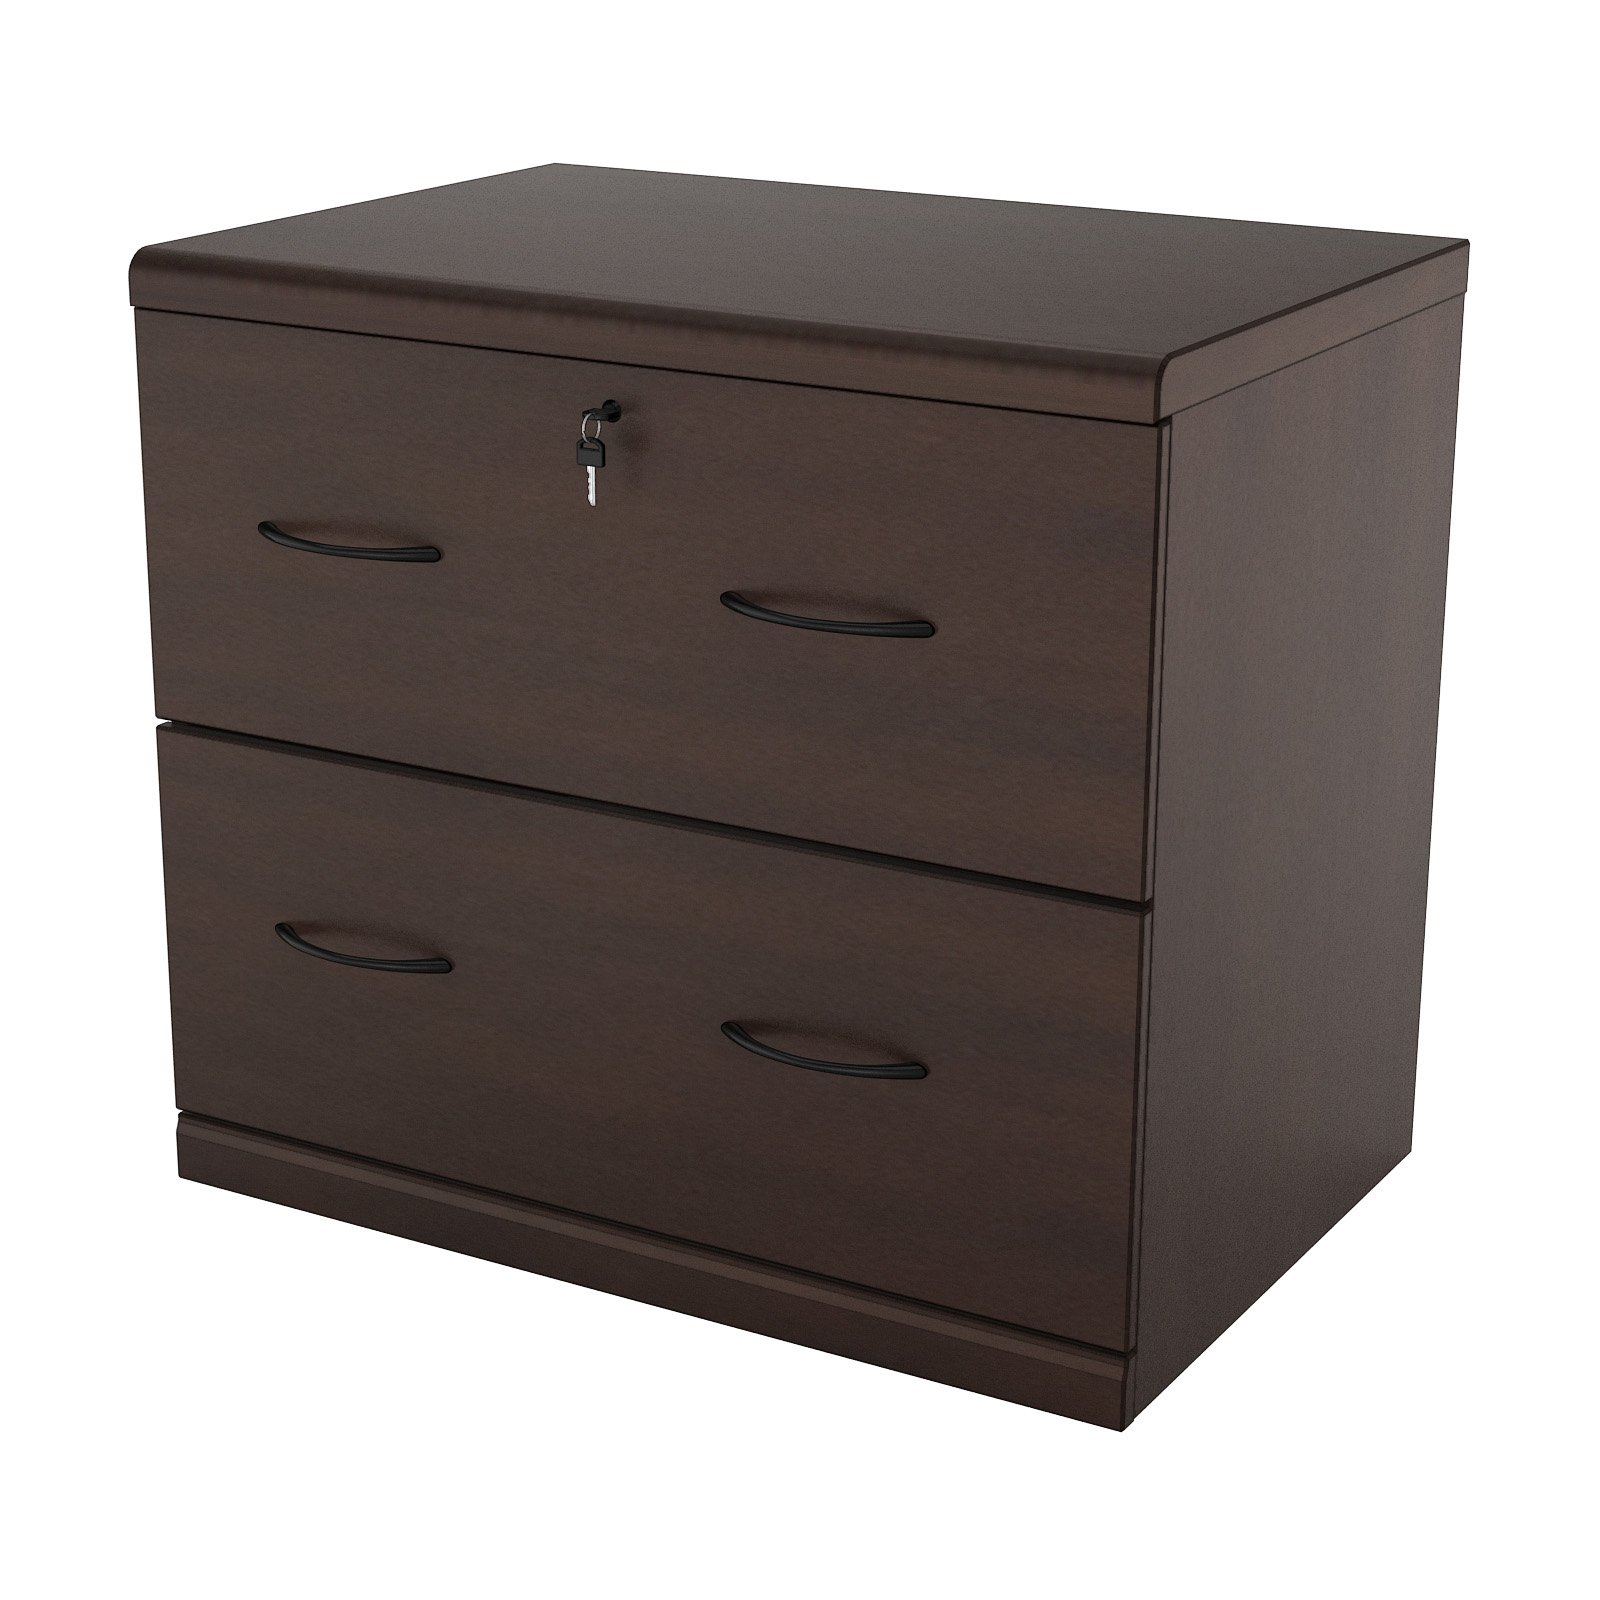 2 Drawer Lateral Wood Lockable Filing Cabinet Espresso Walmart with regard to size 1600 X 1600